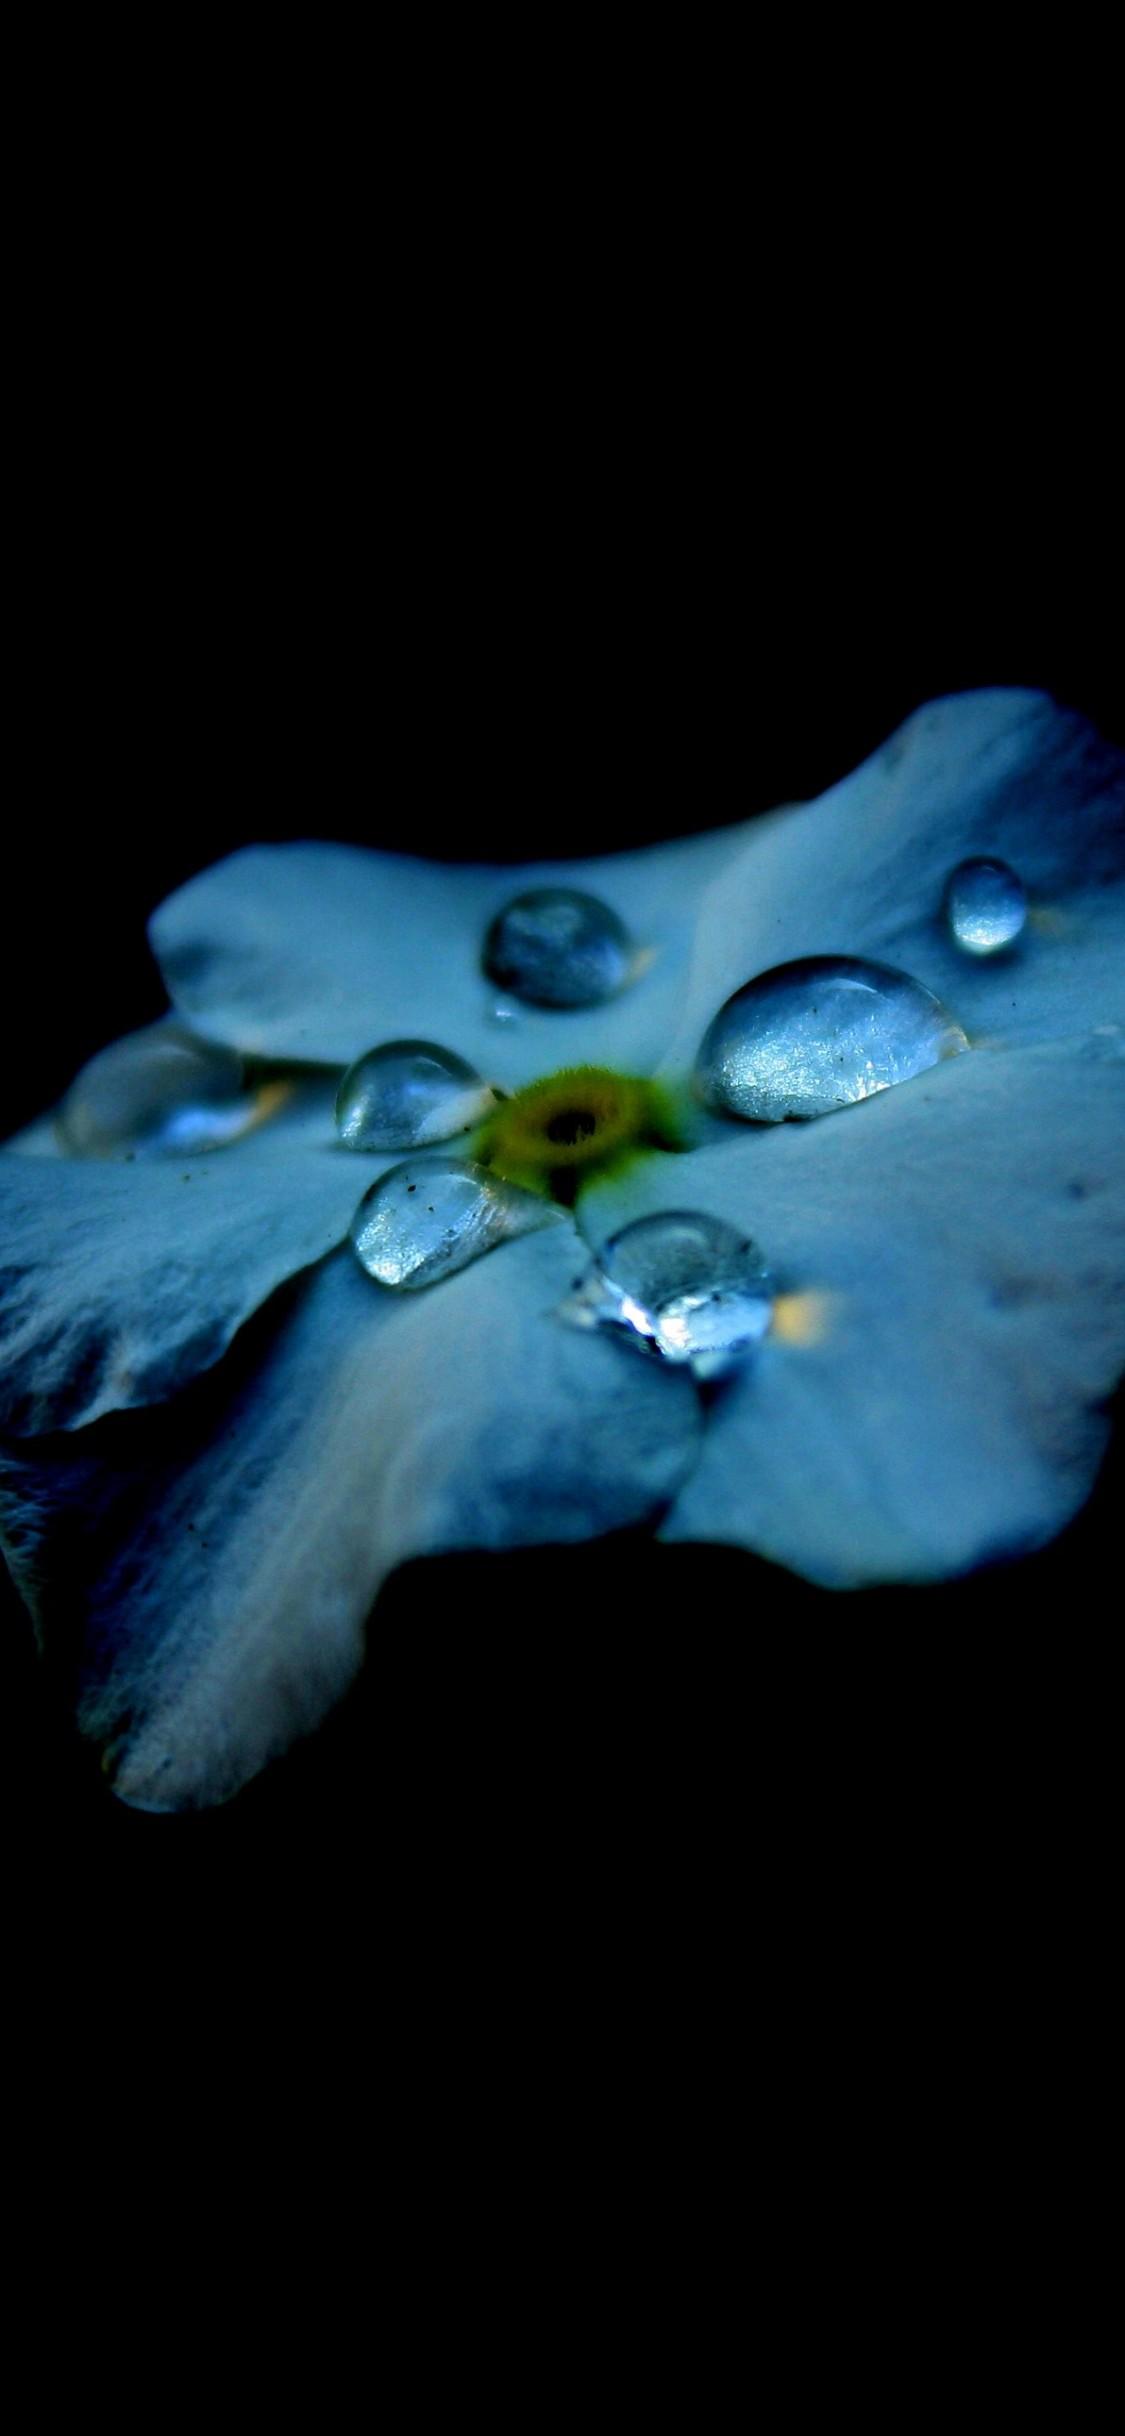 Dew Drops On Flower Oled 4k iPhone XS, iPhone iPhone X